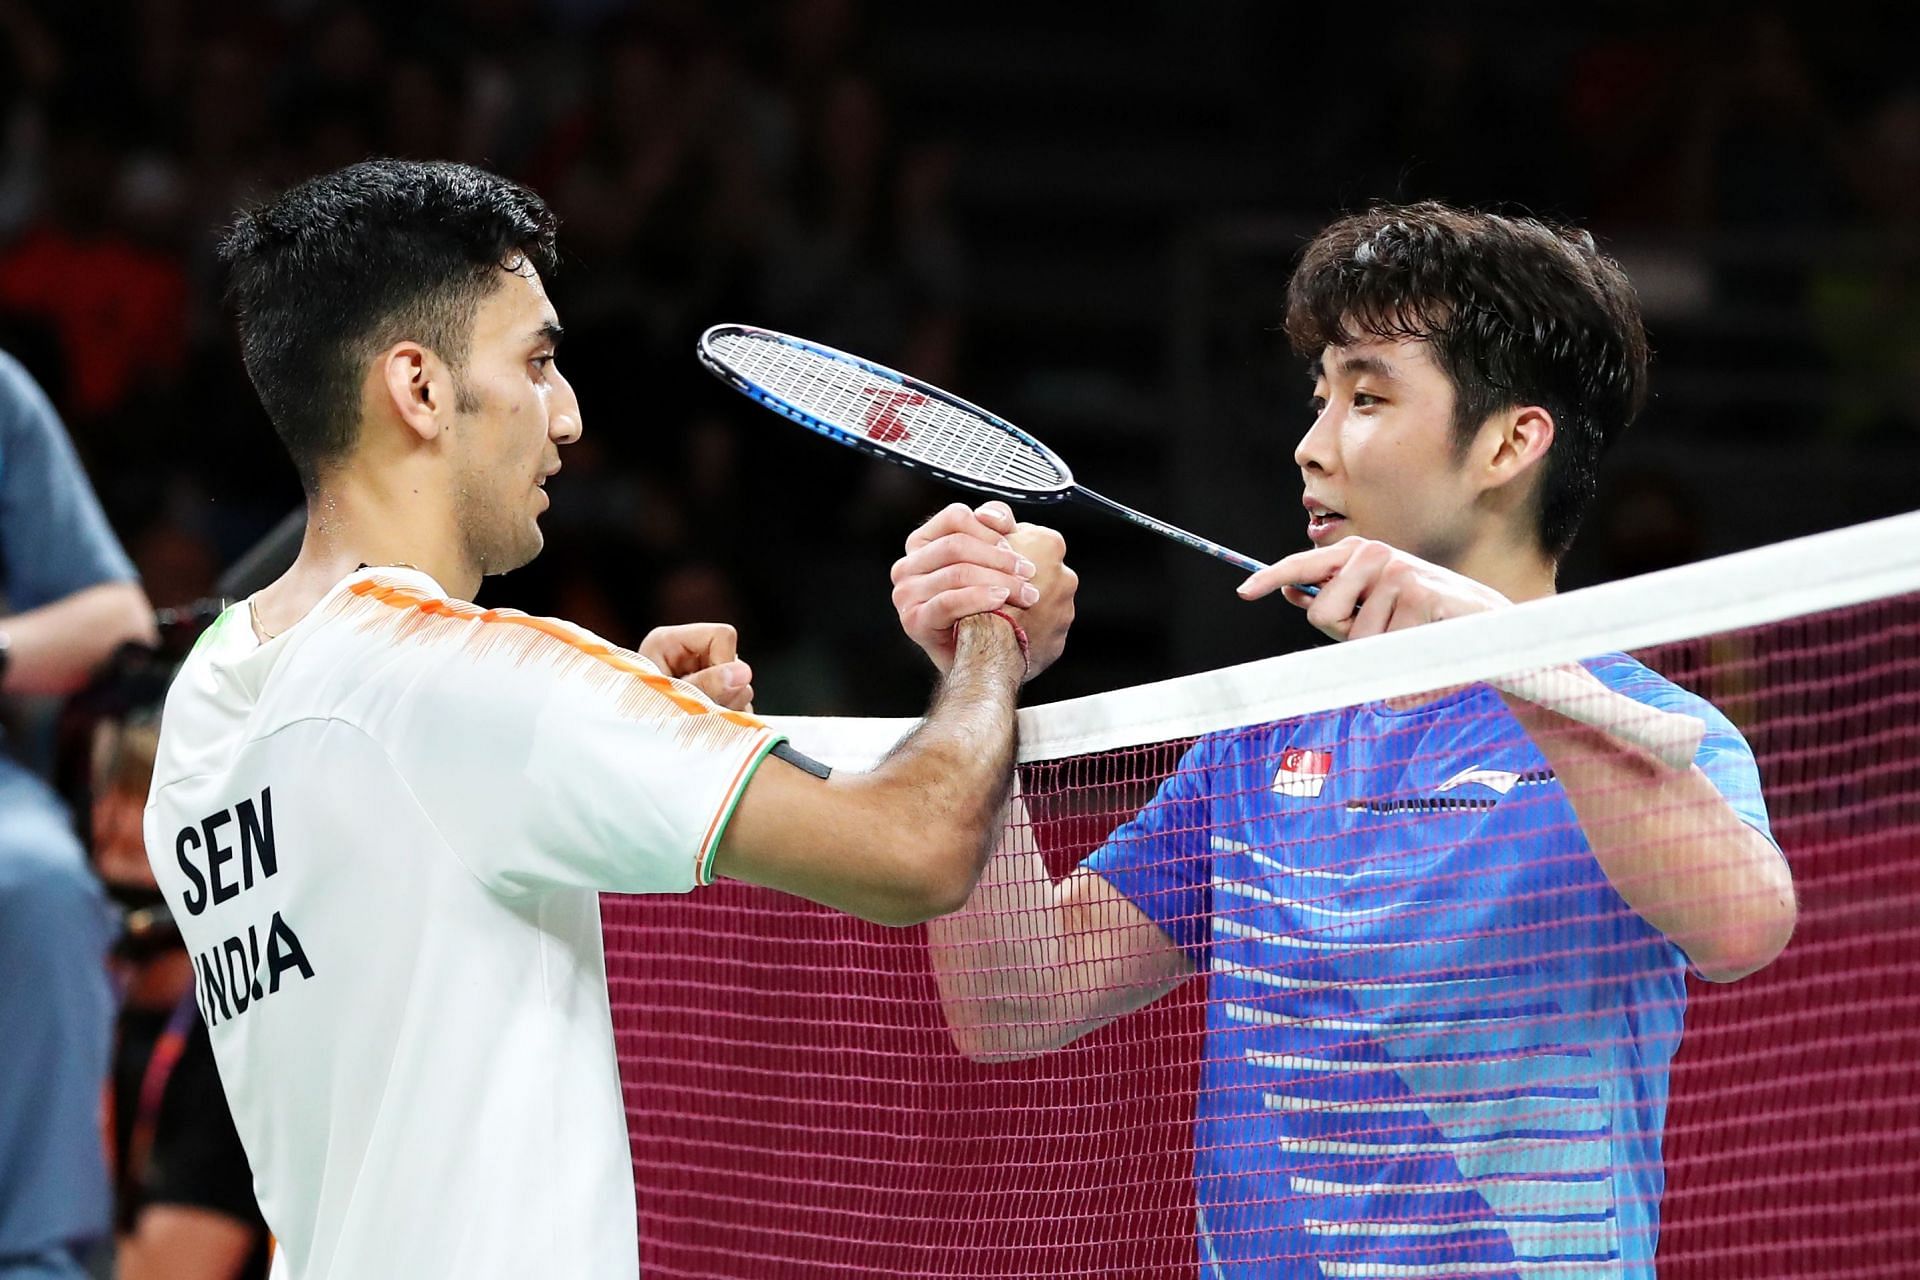 Badminton - Commonwealth Games: Day 4 - Sen (L) during one of his earlier matches at the CWG 2022. (Image: Getty)